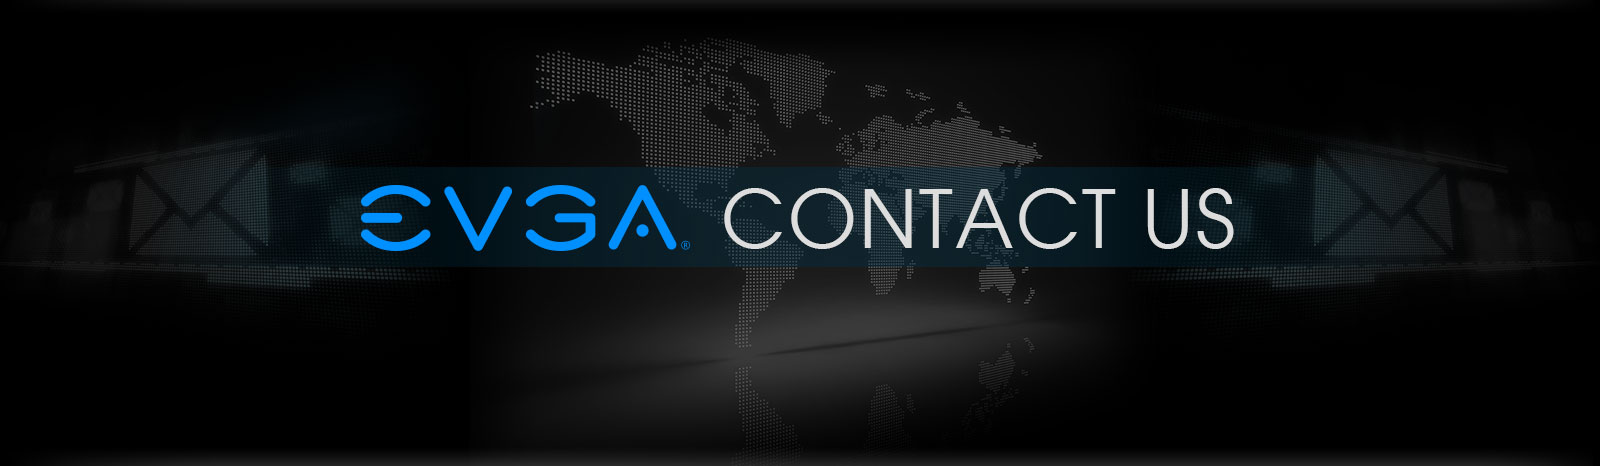 Header of Contact Us